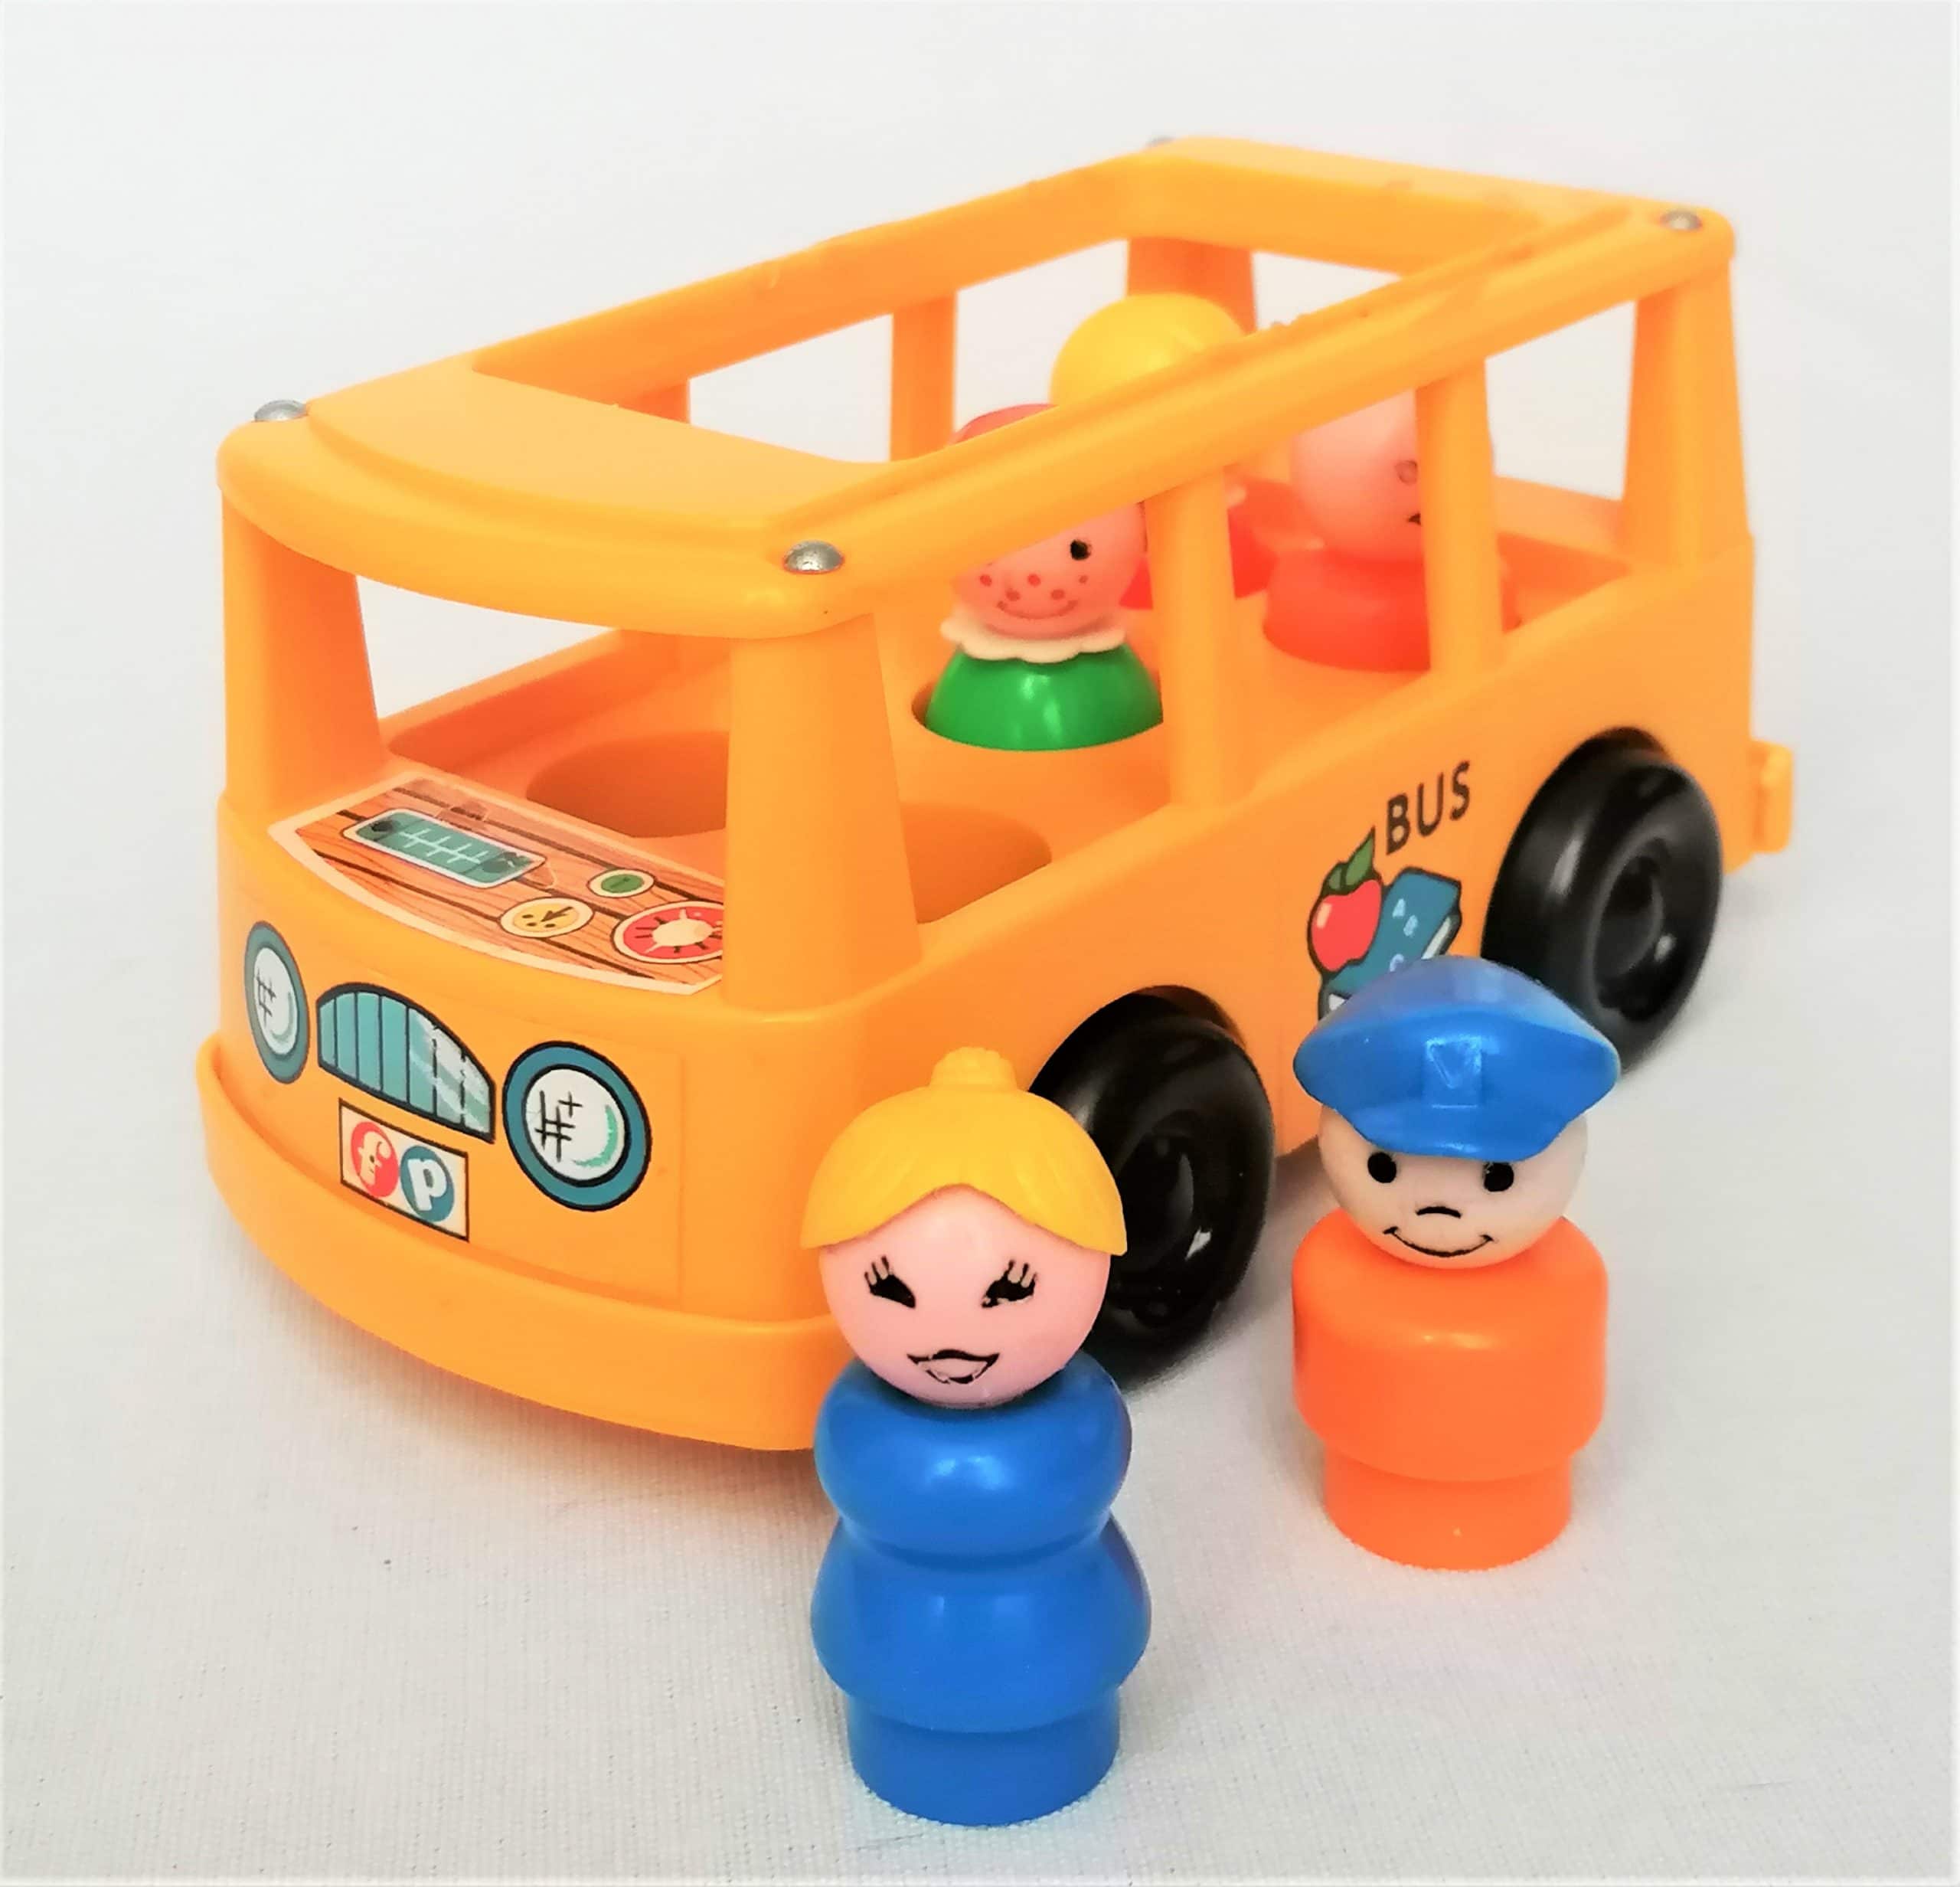 Fisher-Price Little People le Bus Scolaire Jouet…